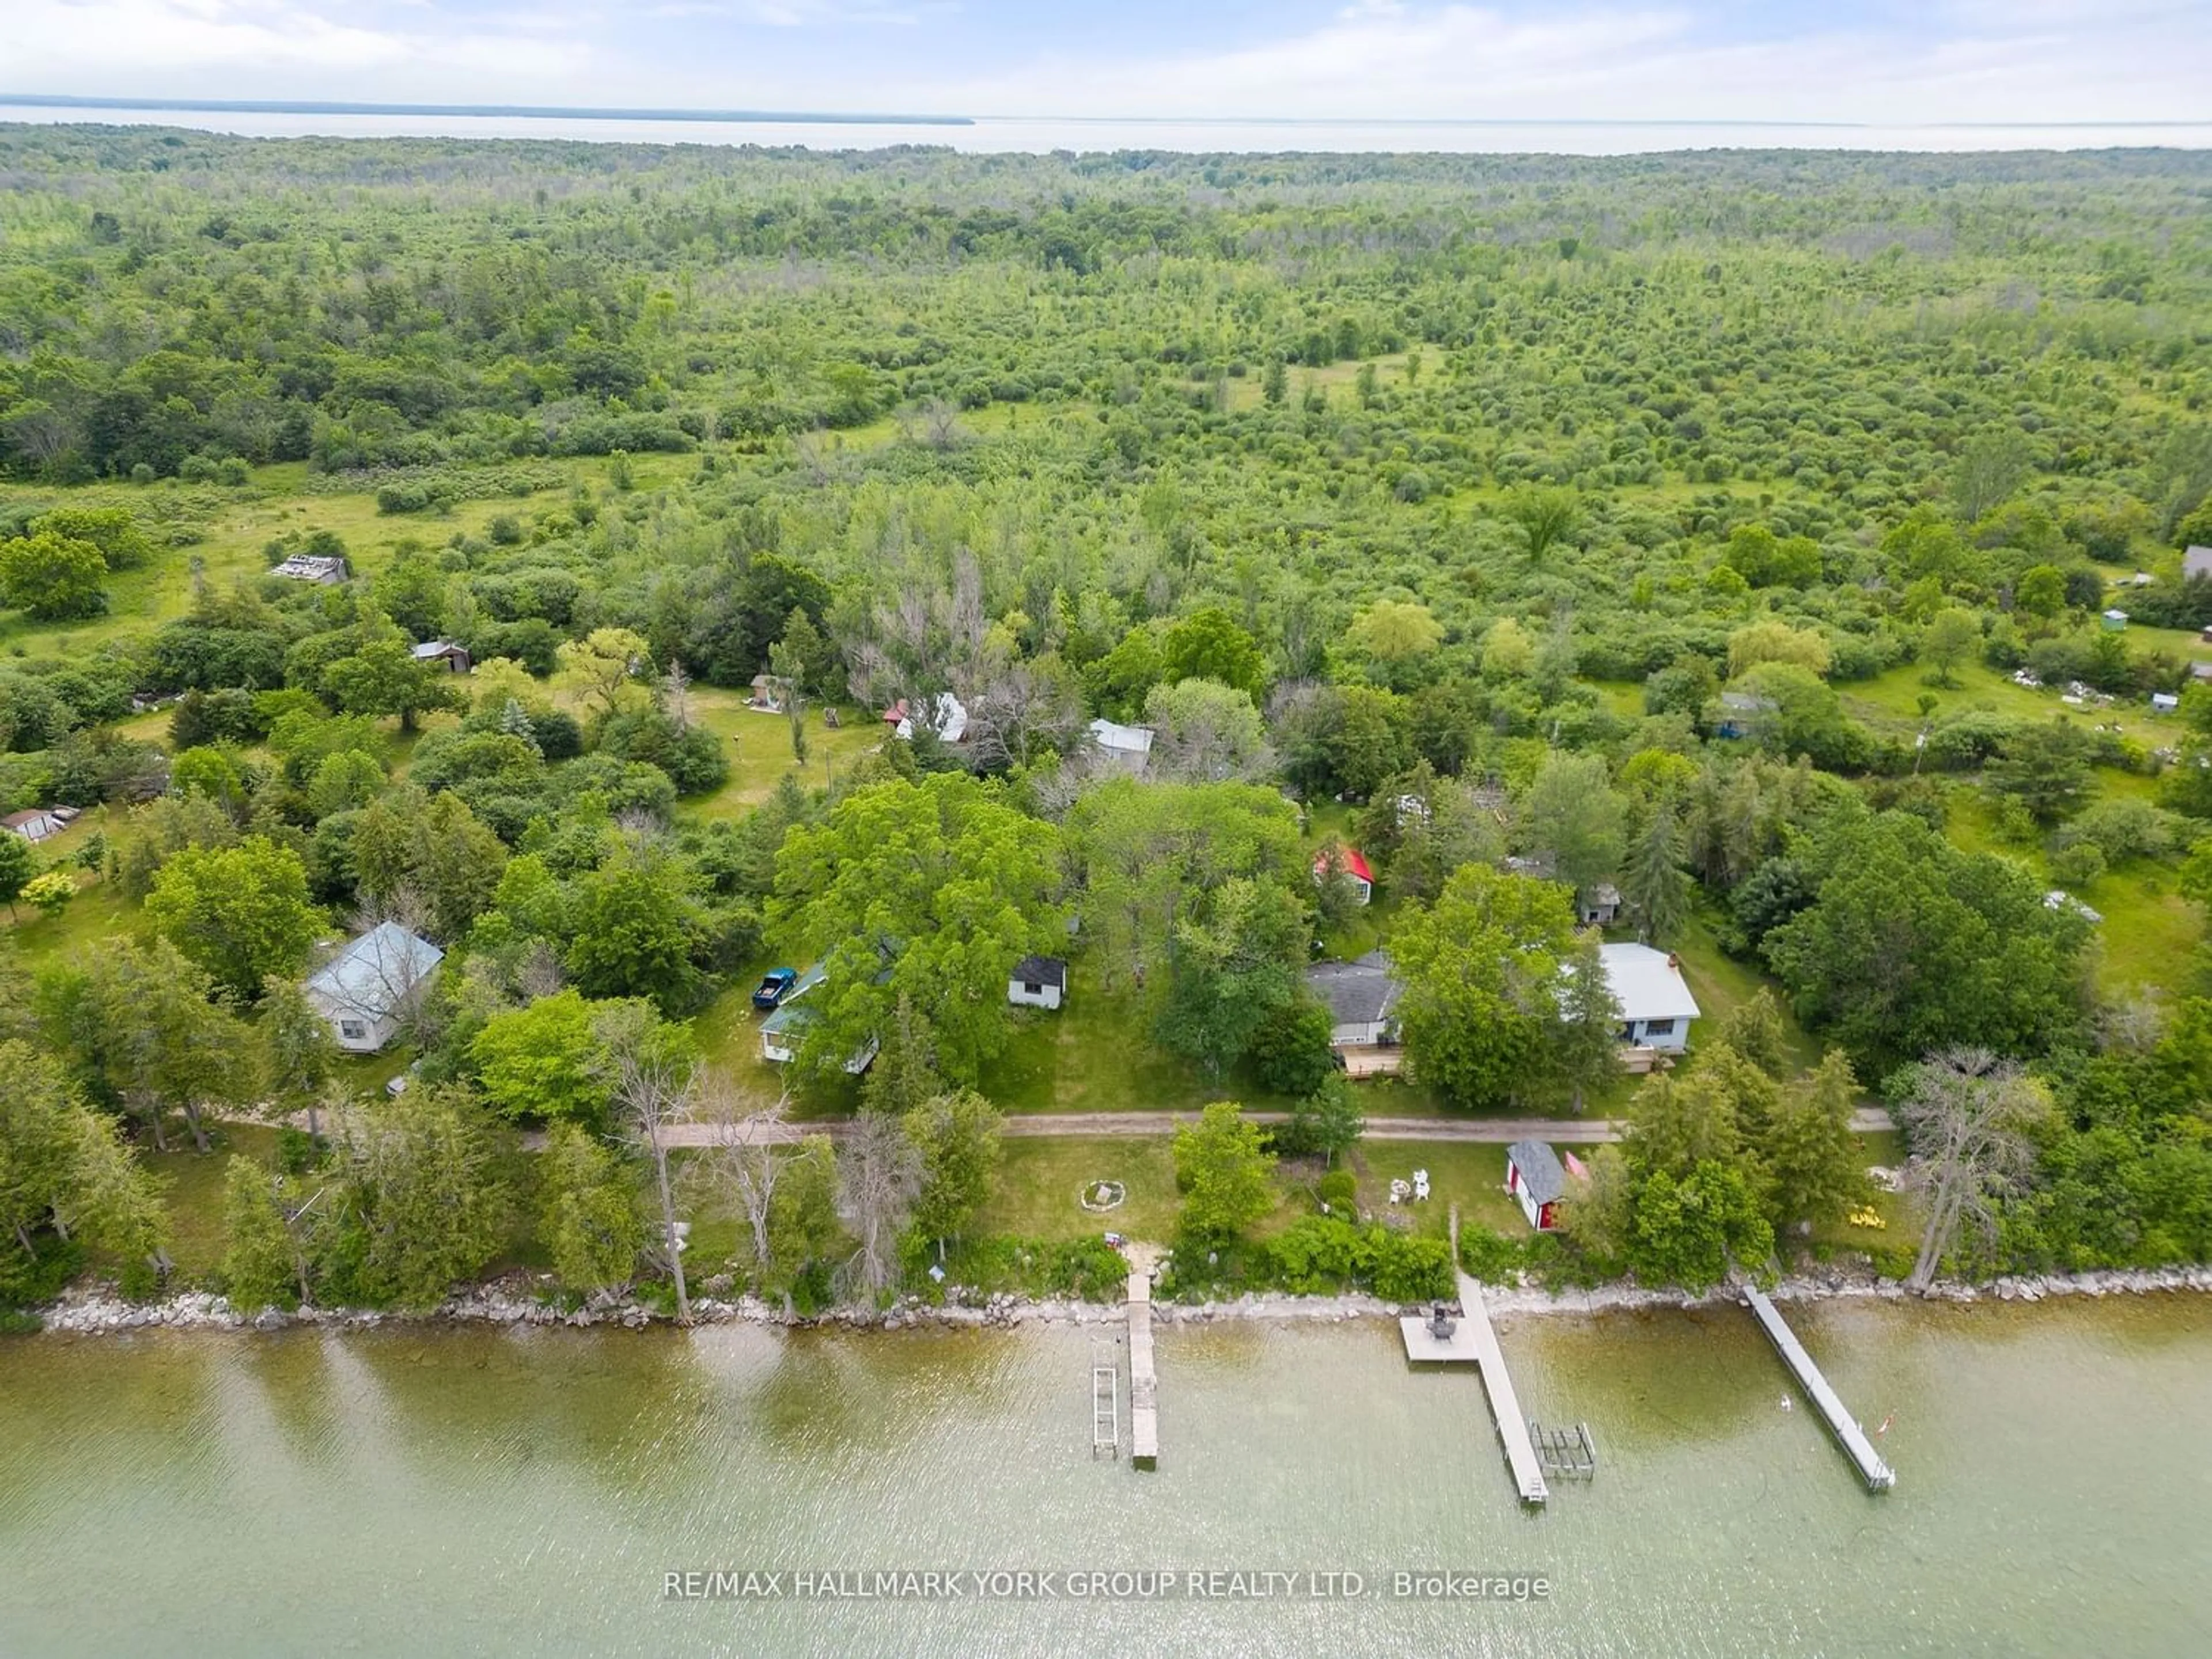 Lakeview for 40630 Shore Rd, Brock Ontario L0K 1A0